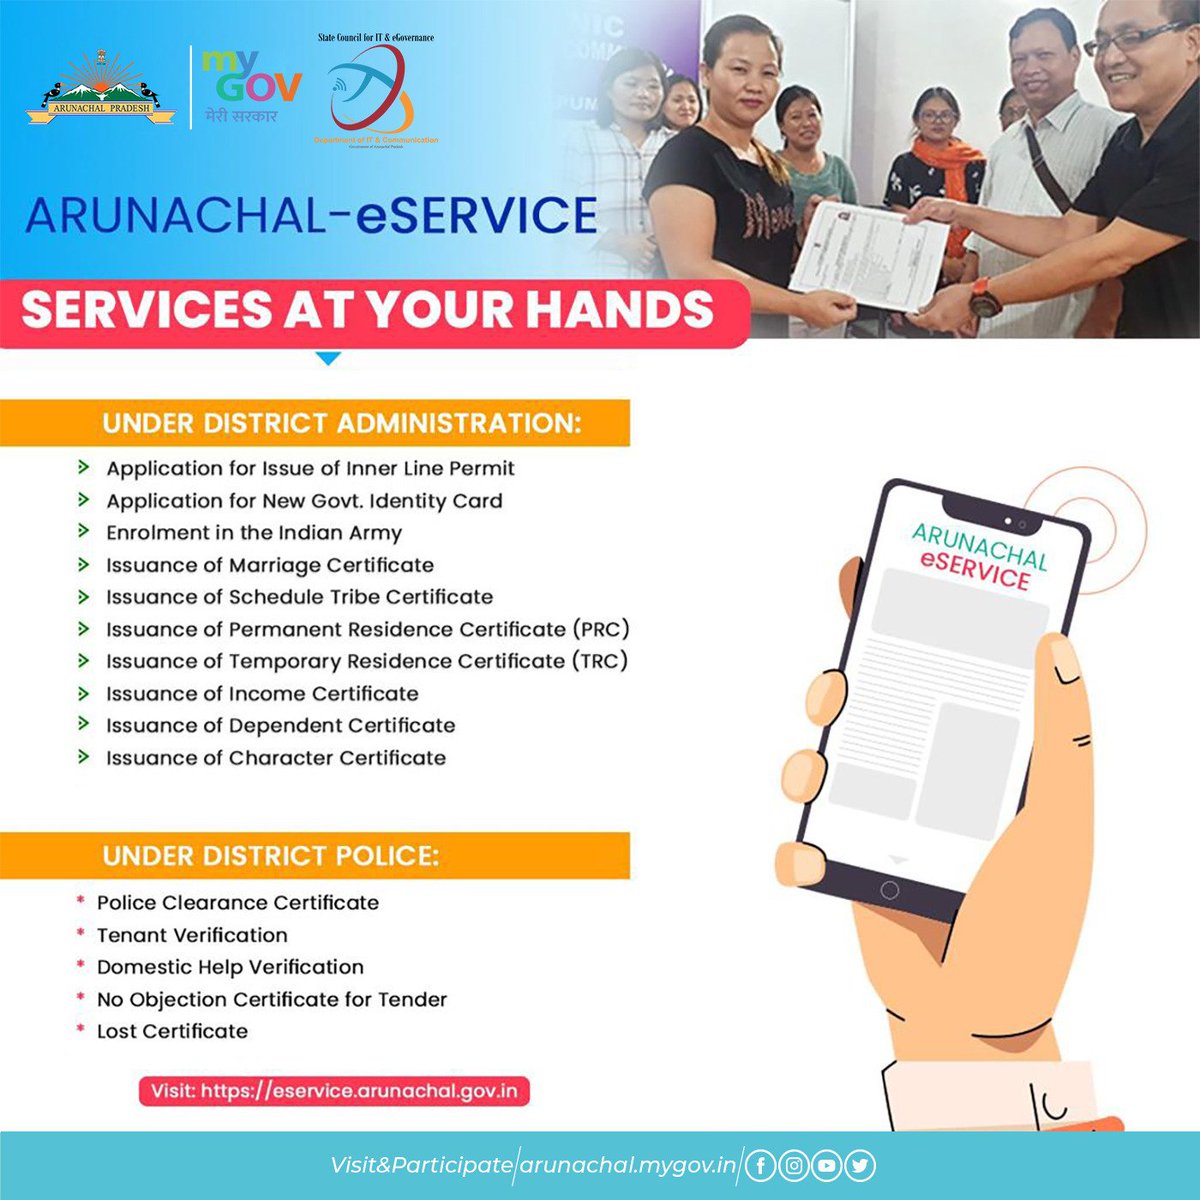 Arunachal Pradesh now has a variety of essential online services at your disposal. These services include the issuance of ILPs, Govt. Identity Cards, ST Certificates, Marriage Certificates, PRC, TRC, Police Clearance Certificates, Domestic Help Verification Certificates, etc.